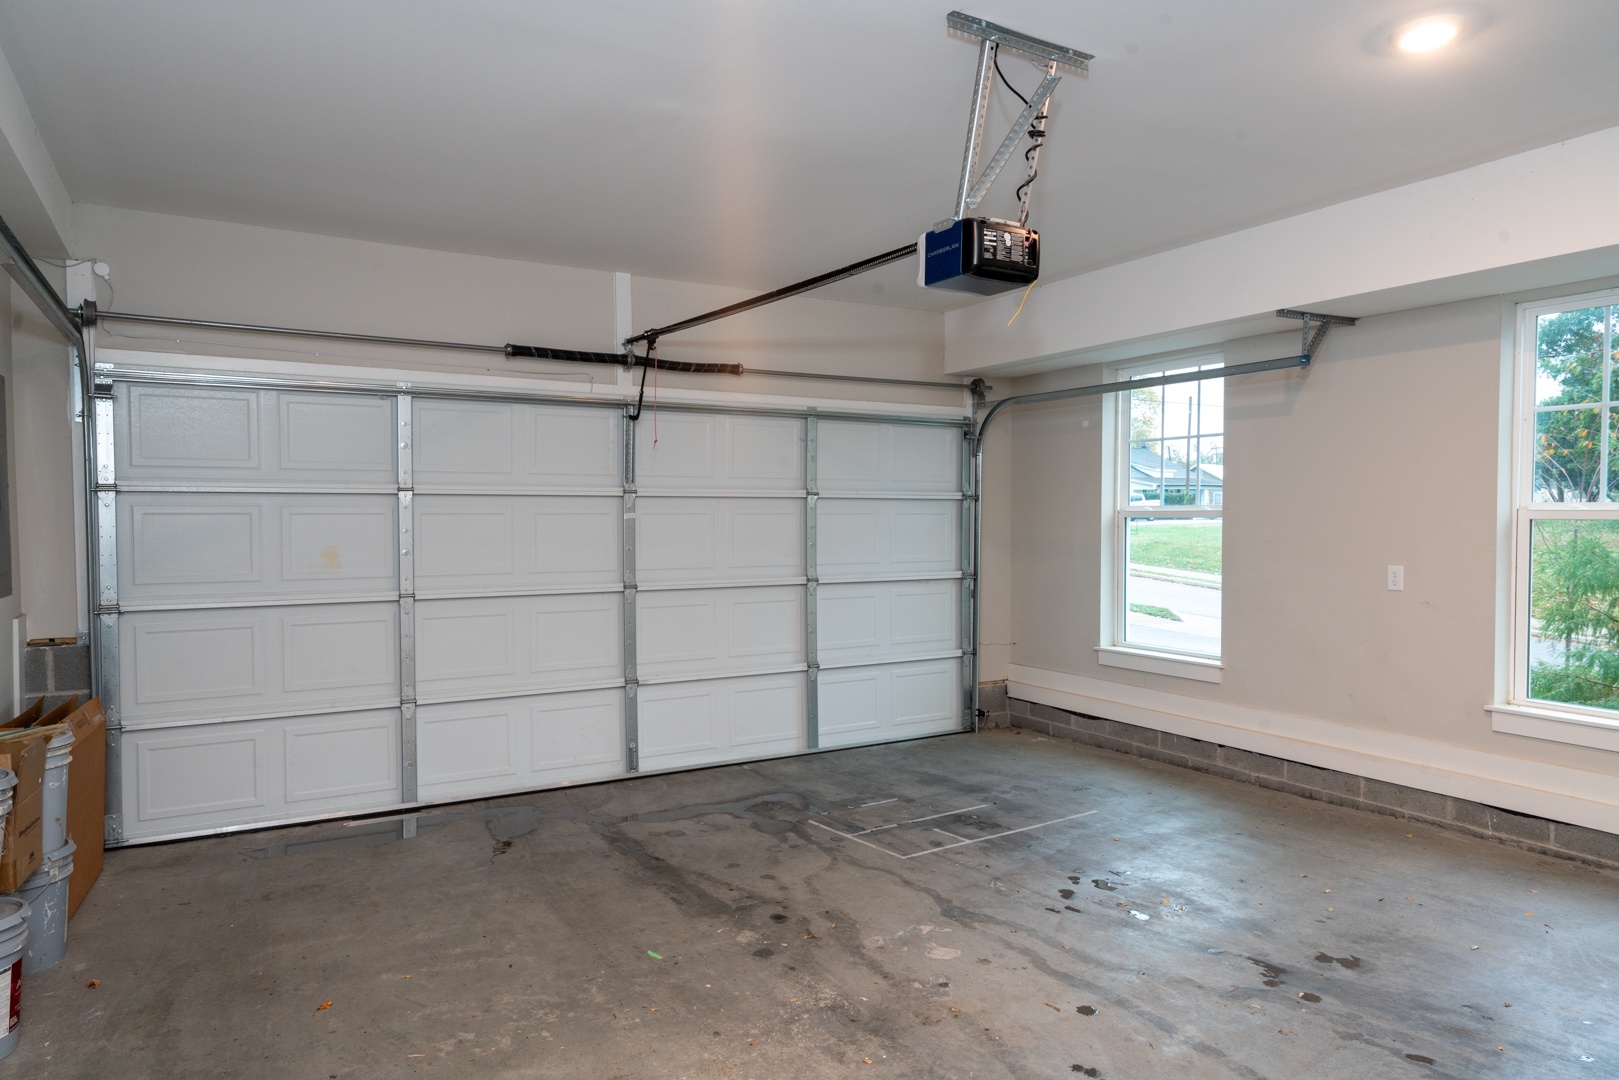 The garage offers parking space for up to 2 vehicles